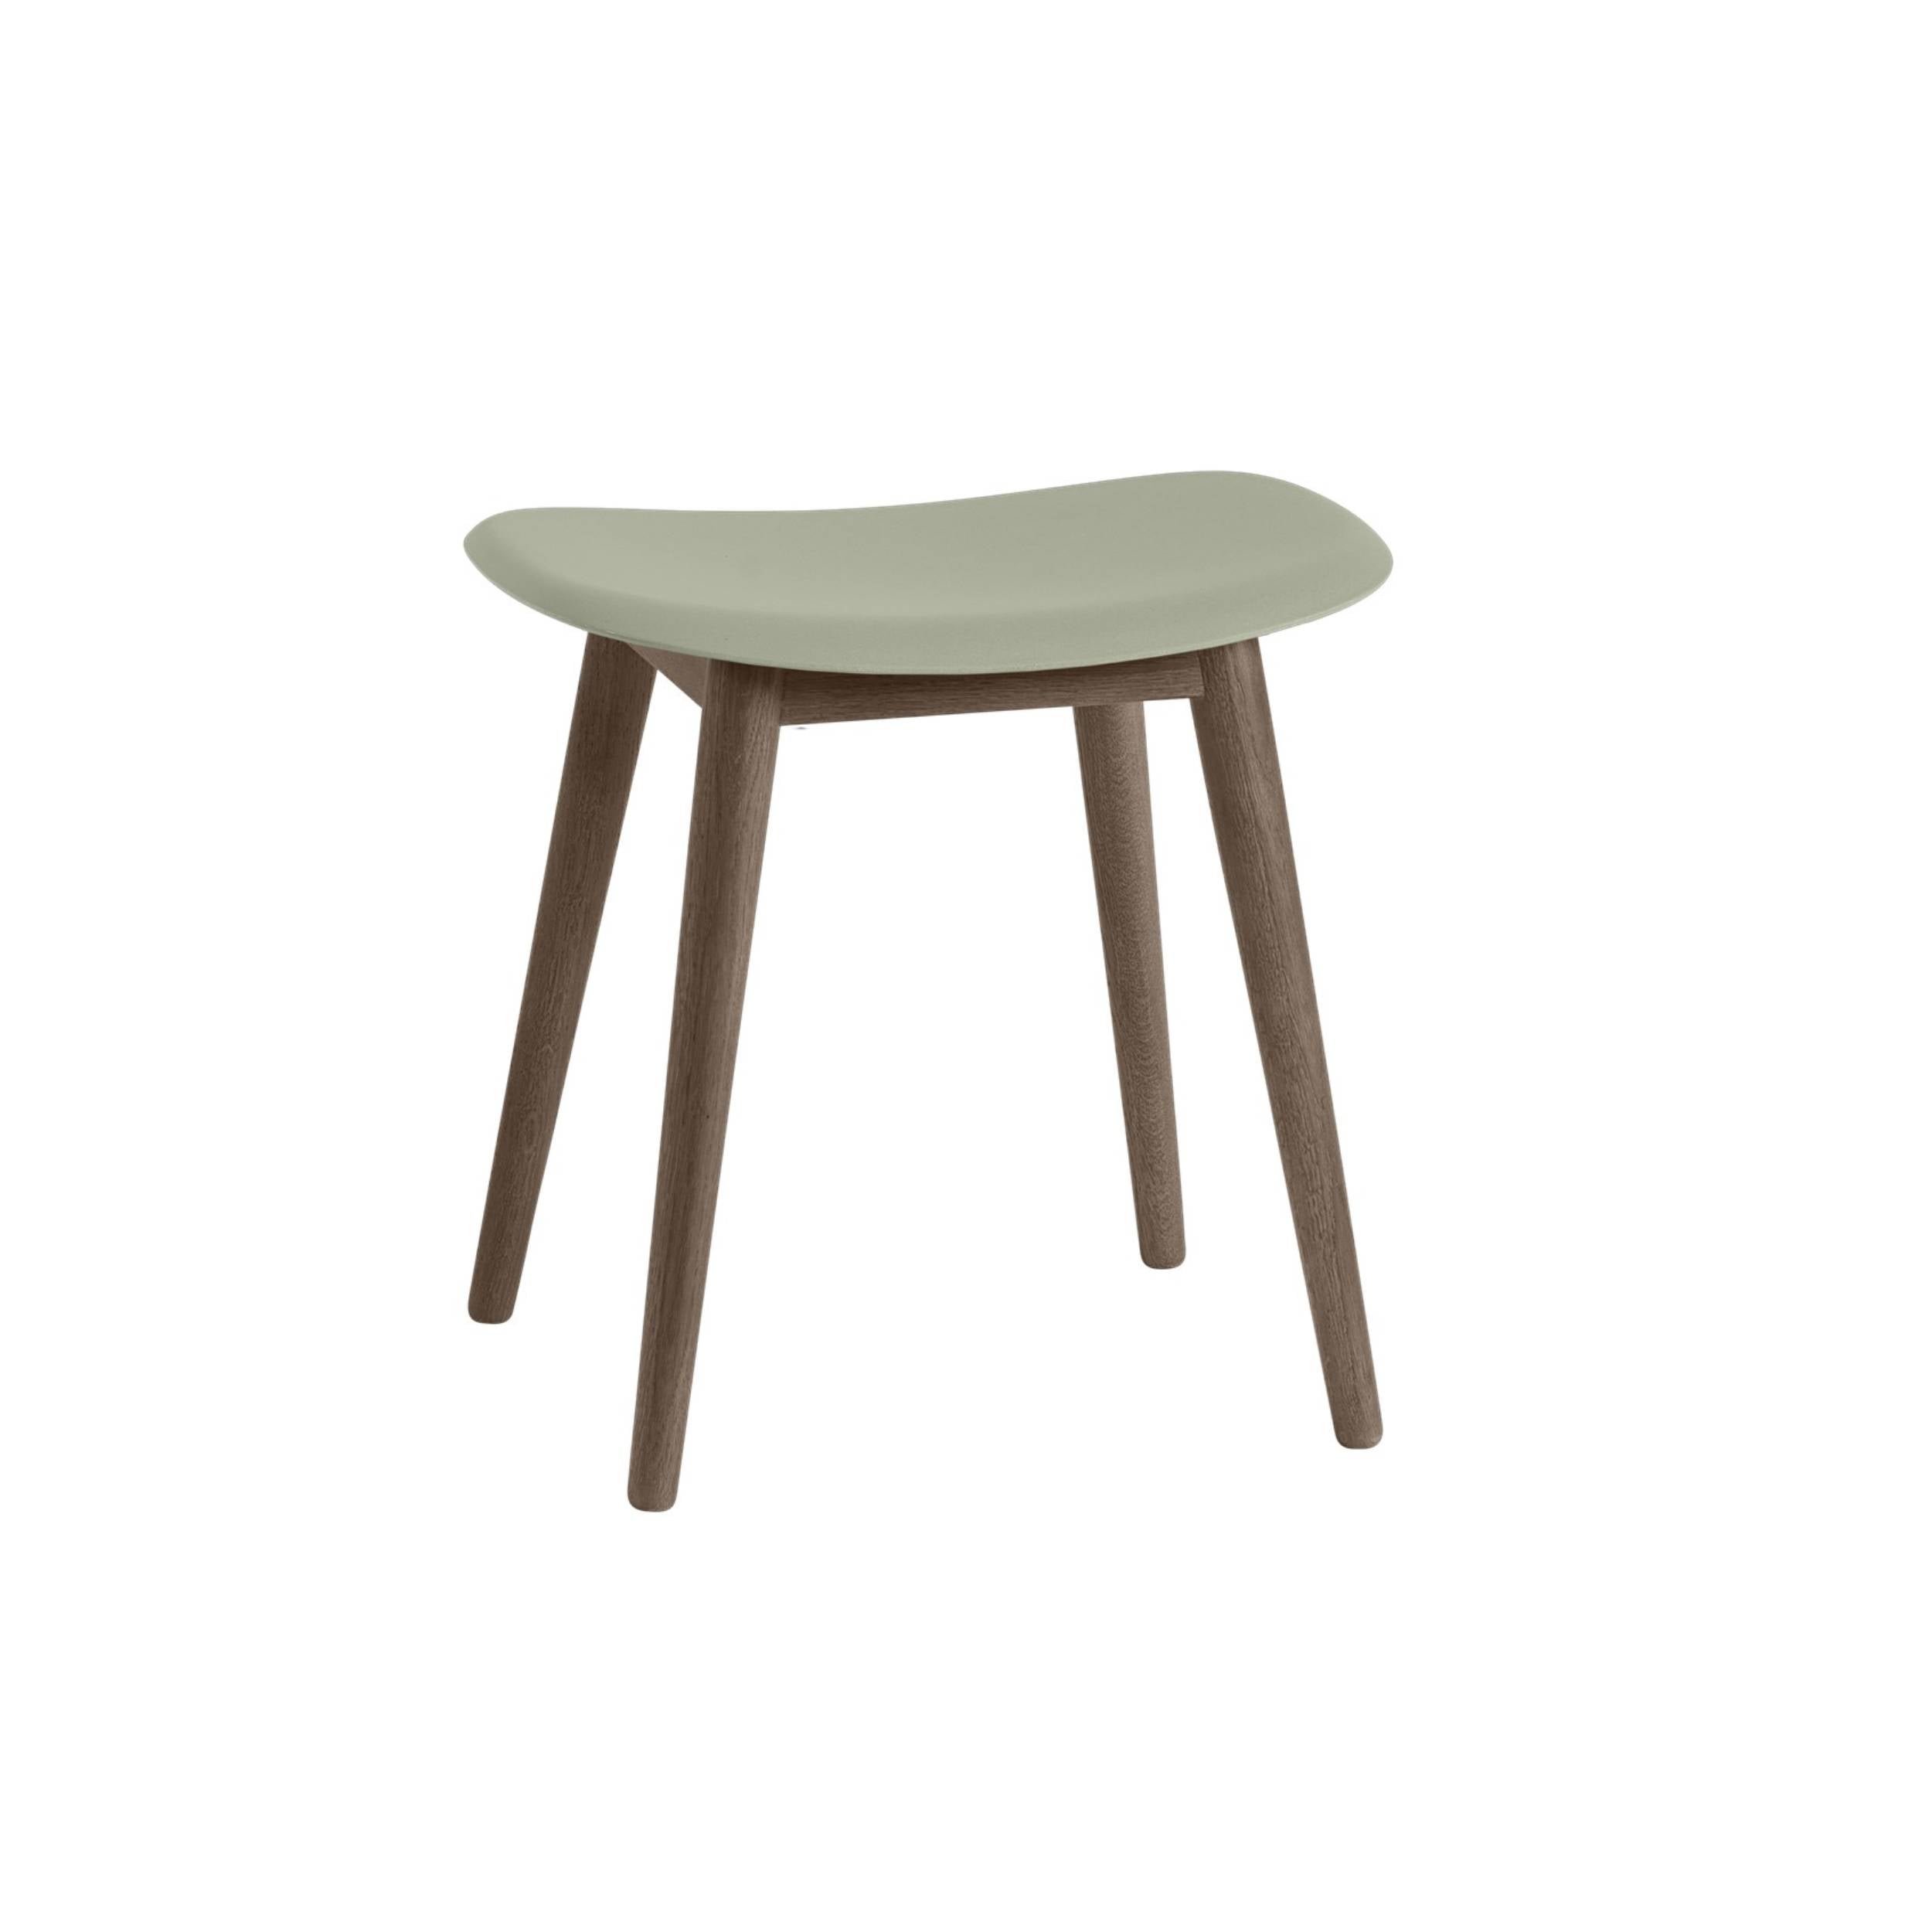 Fiber Stool: Wood Base + Stained Dark Brown + Dusty Green